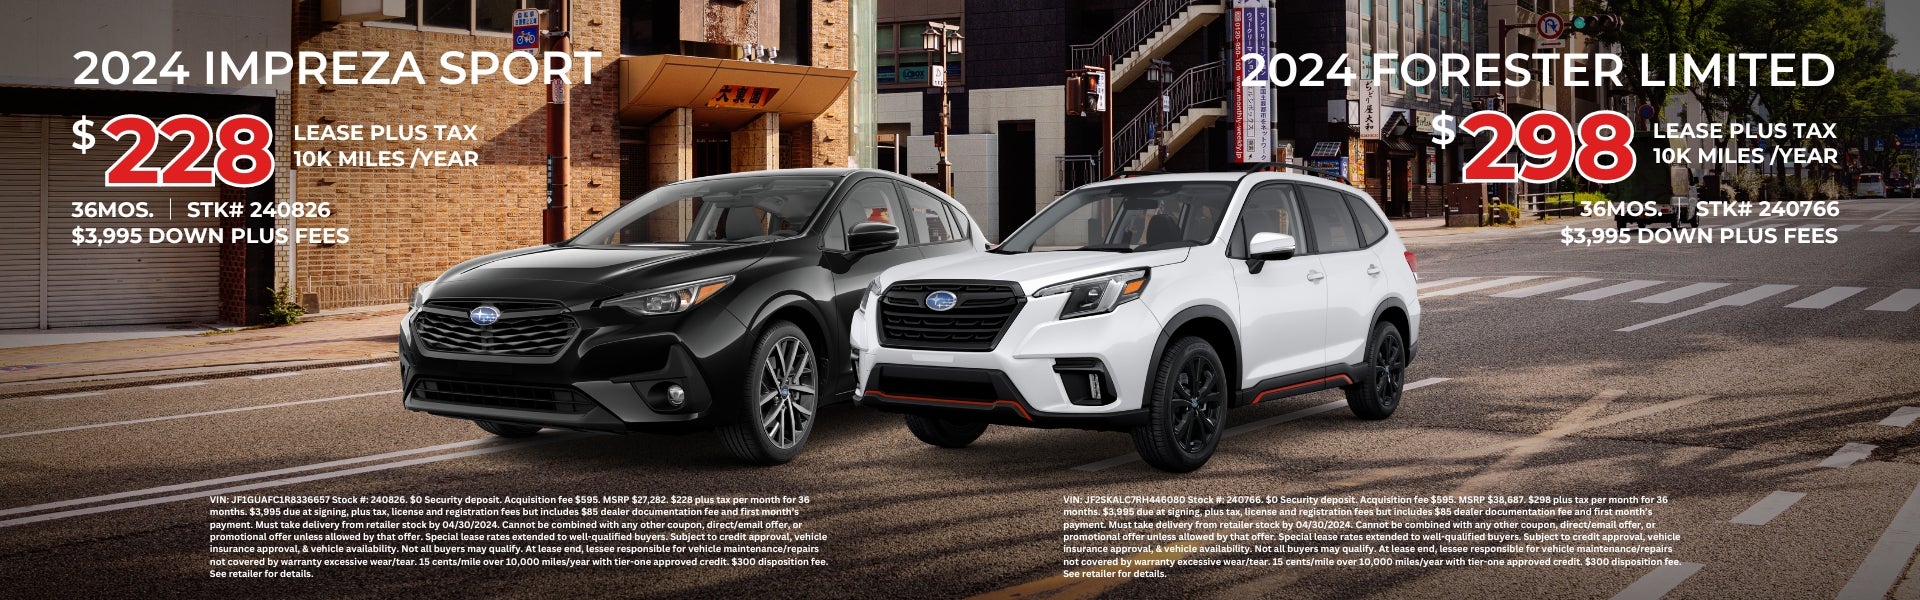 2024 impreza and 2024 forester